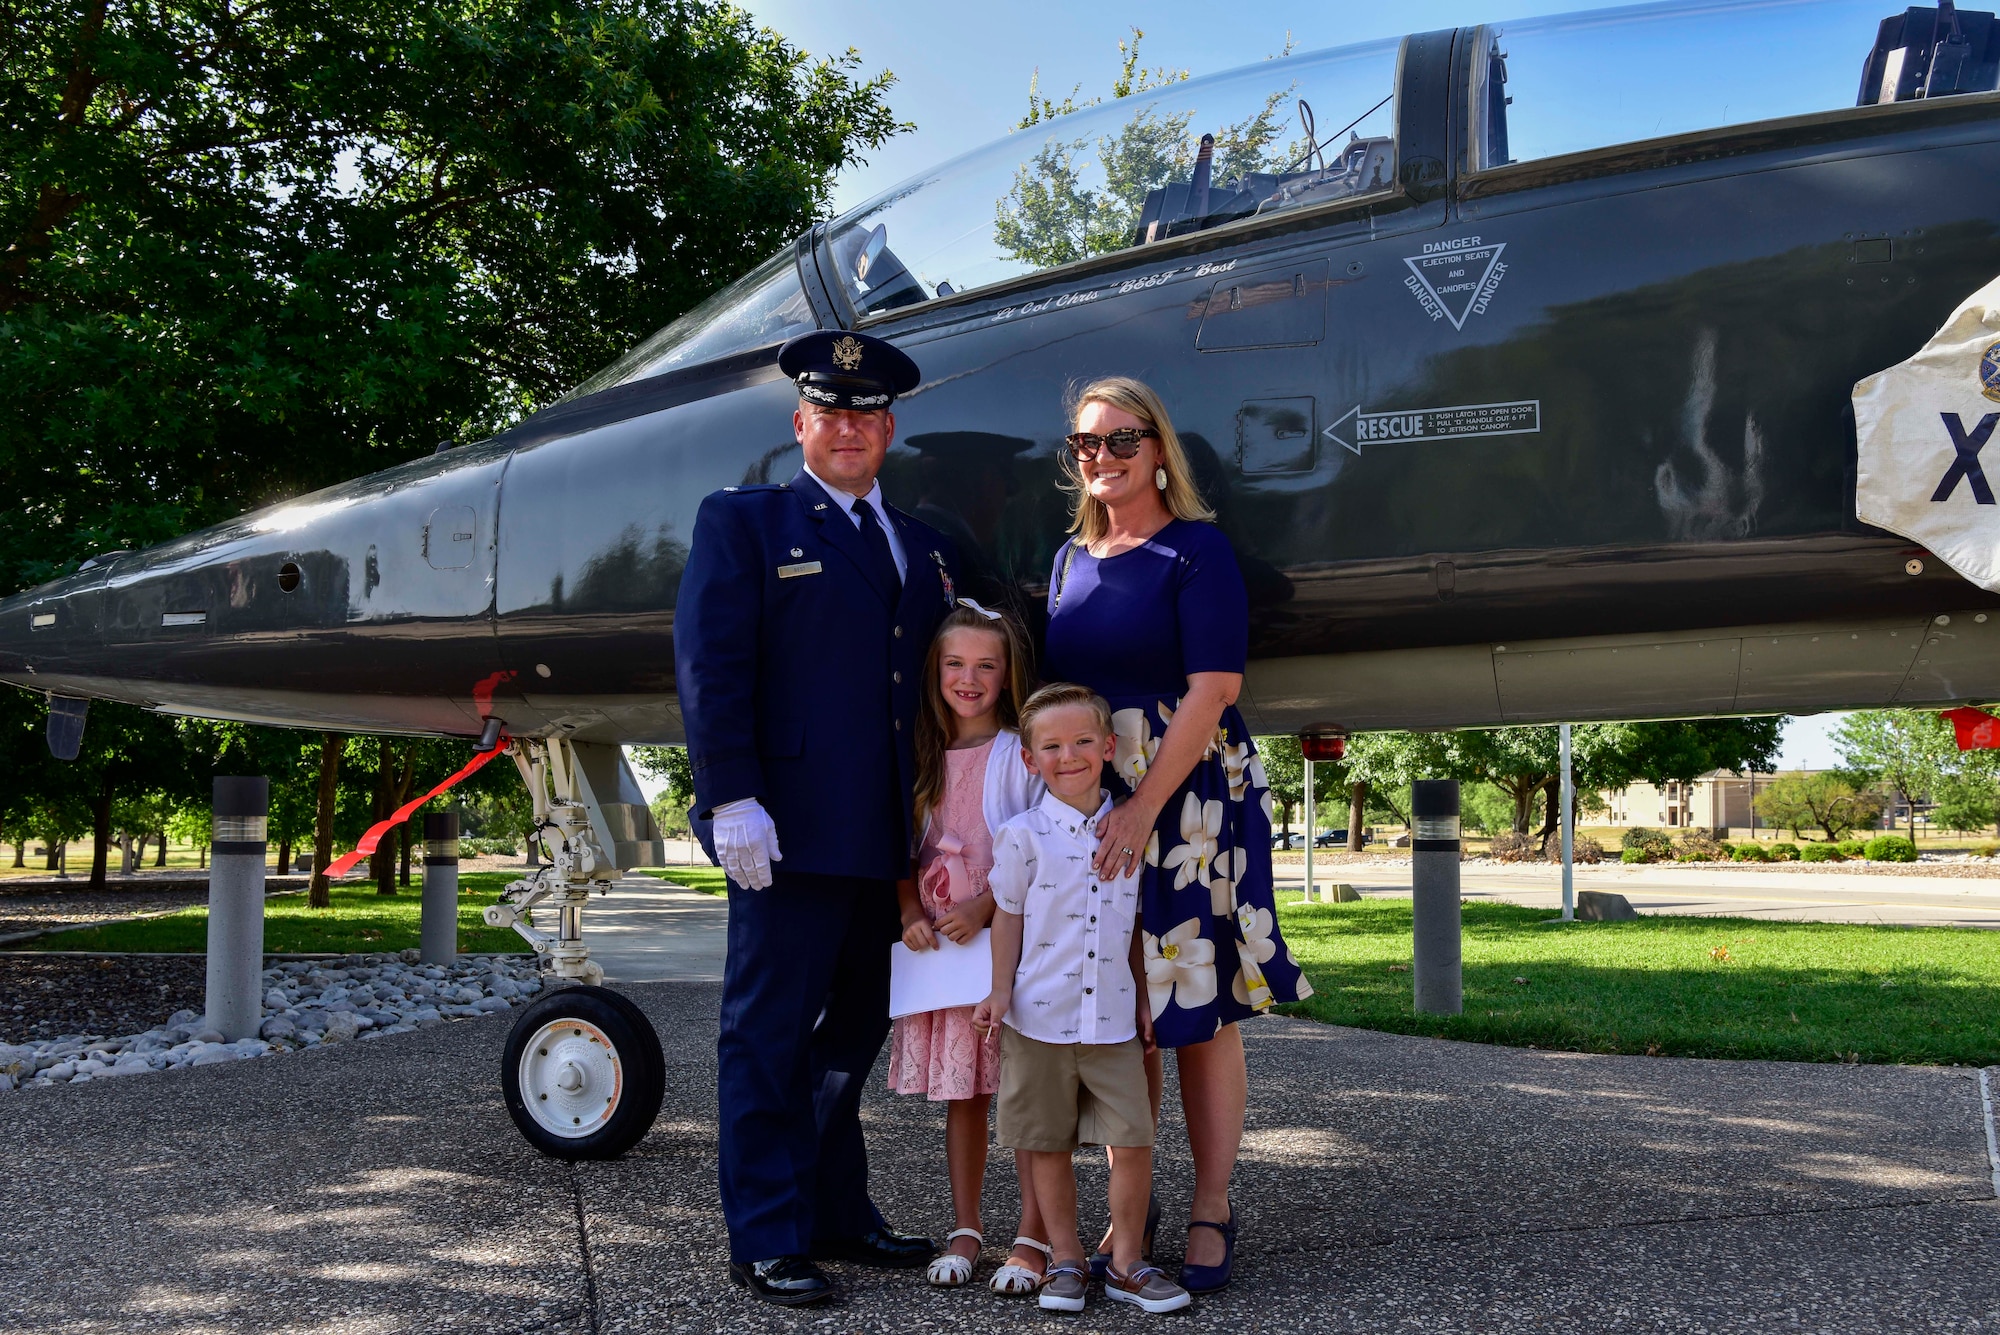 Lt. Col. Christopher Best, 47th Student Squadron commander, and his family pose for a picture in front of a T-38 Talon II at Laughlin Air Force Base, Texas, May 18, 2020. Best assumed command of the 47th Student Squadron after two years as commander of the 87th Flying Training Squadron. (U.S. Air Force photo by Senior Airman Marco A. Gomez)